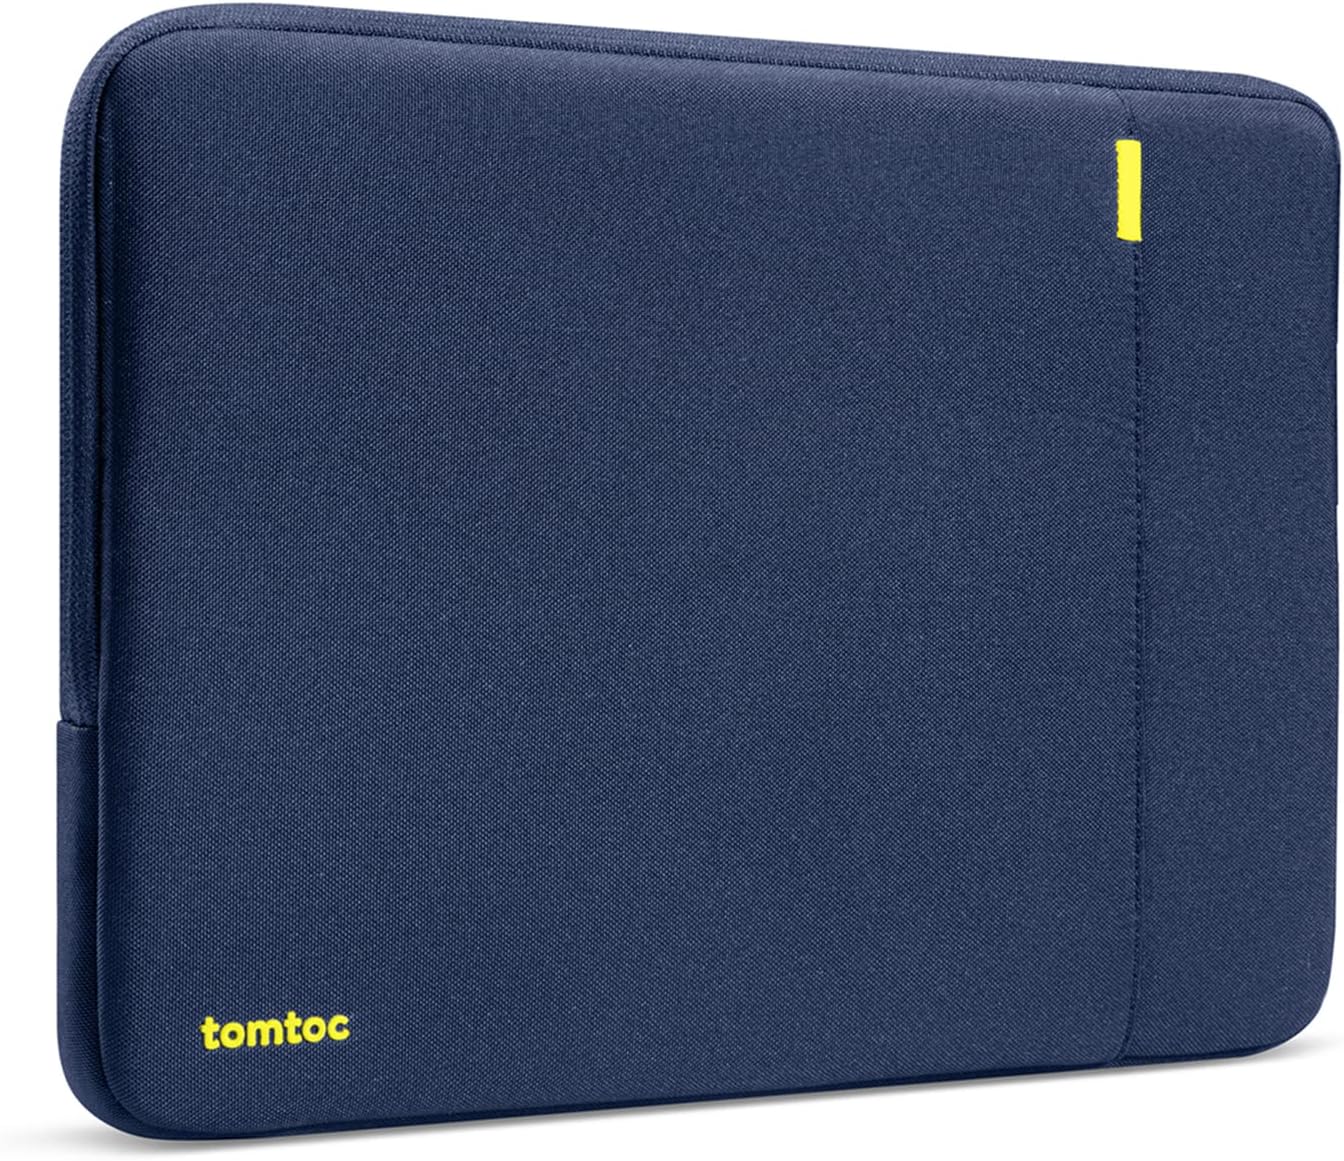 tomtoc 360° Protective Laptop Sleeve for 13-inch MacBook Air